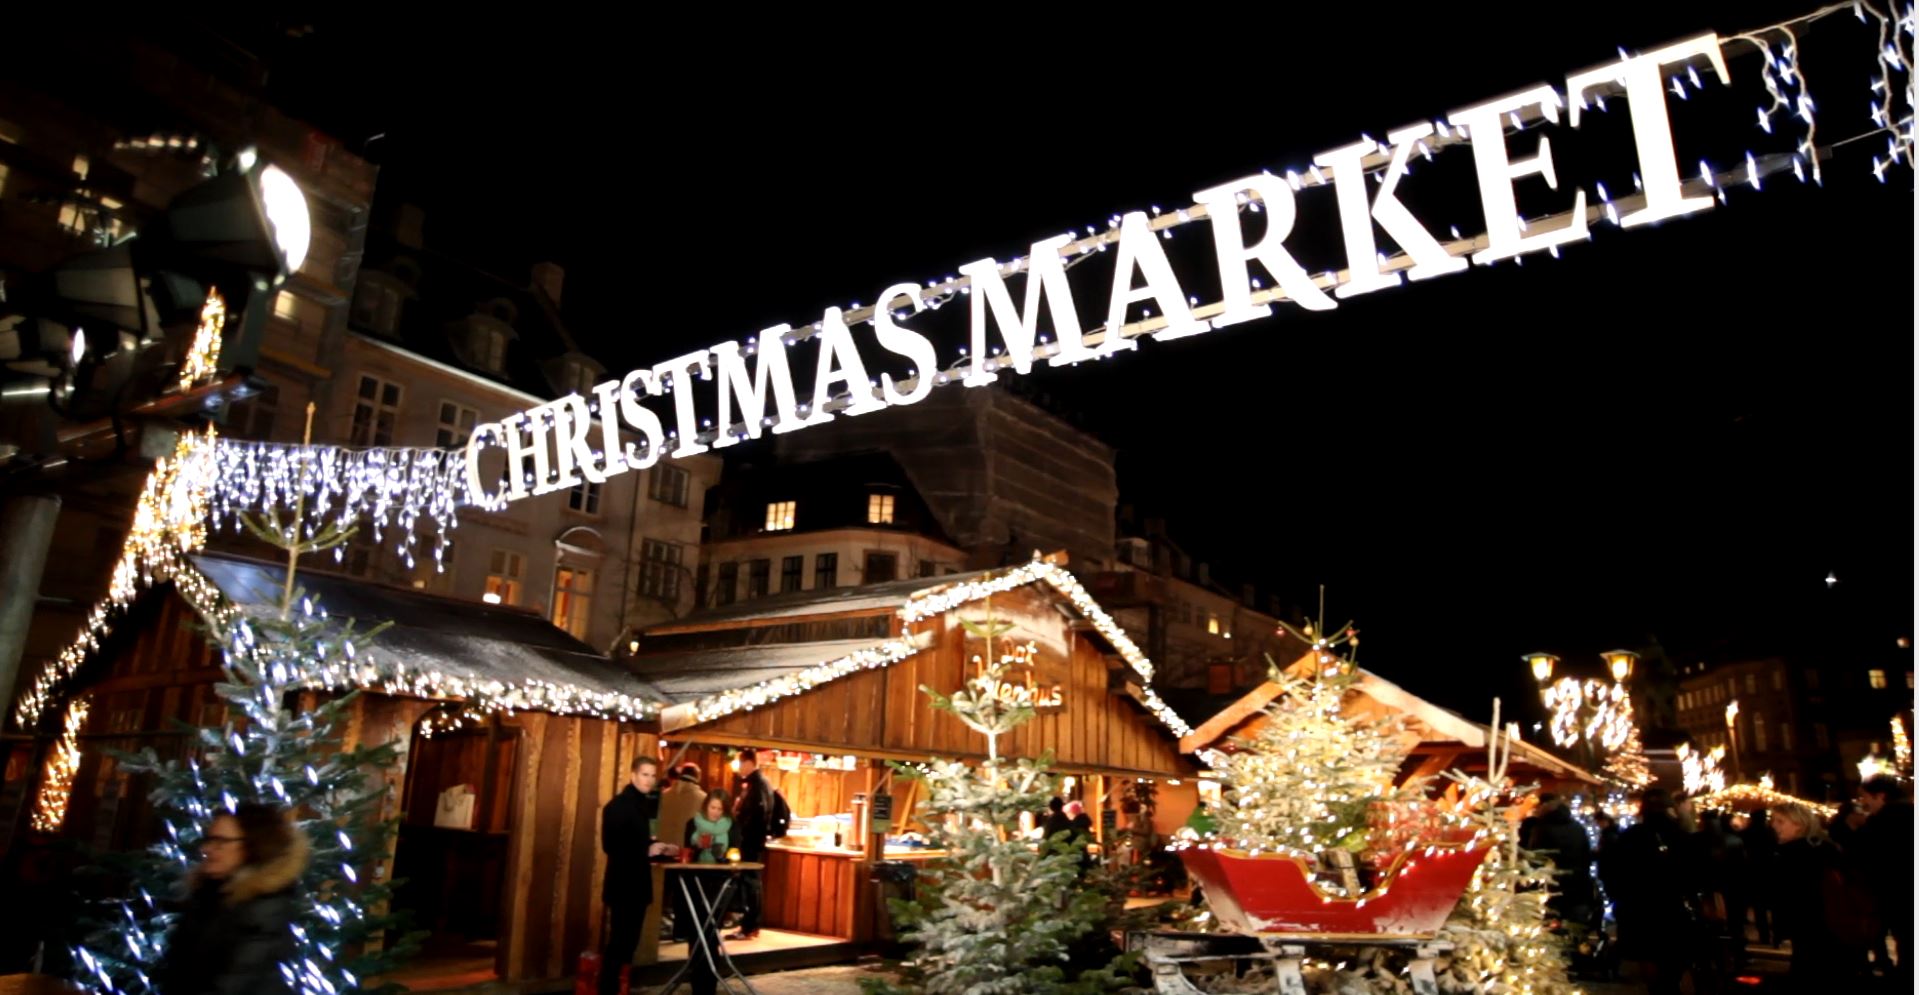 Christmas Eve Market on Saturday, December 24th, 7am-12 noon